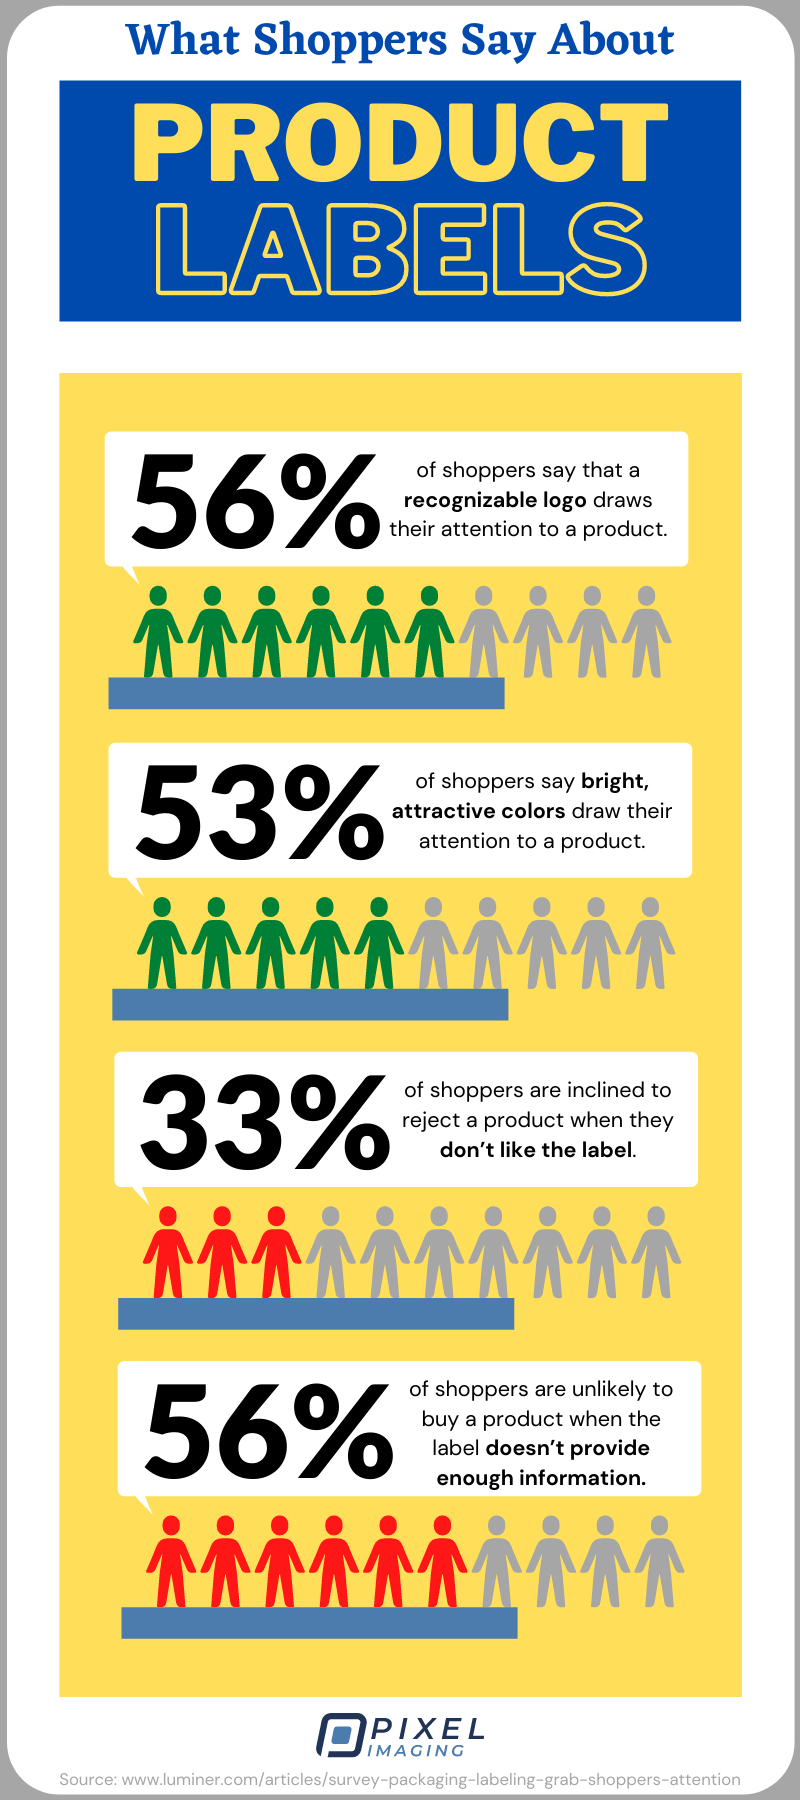 What Shoppers Say About Product Labels